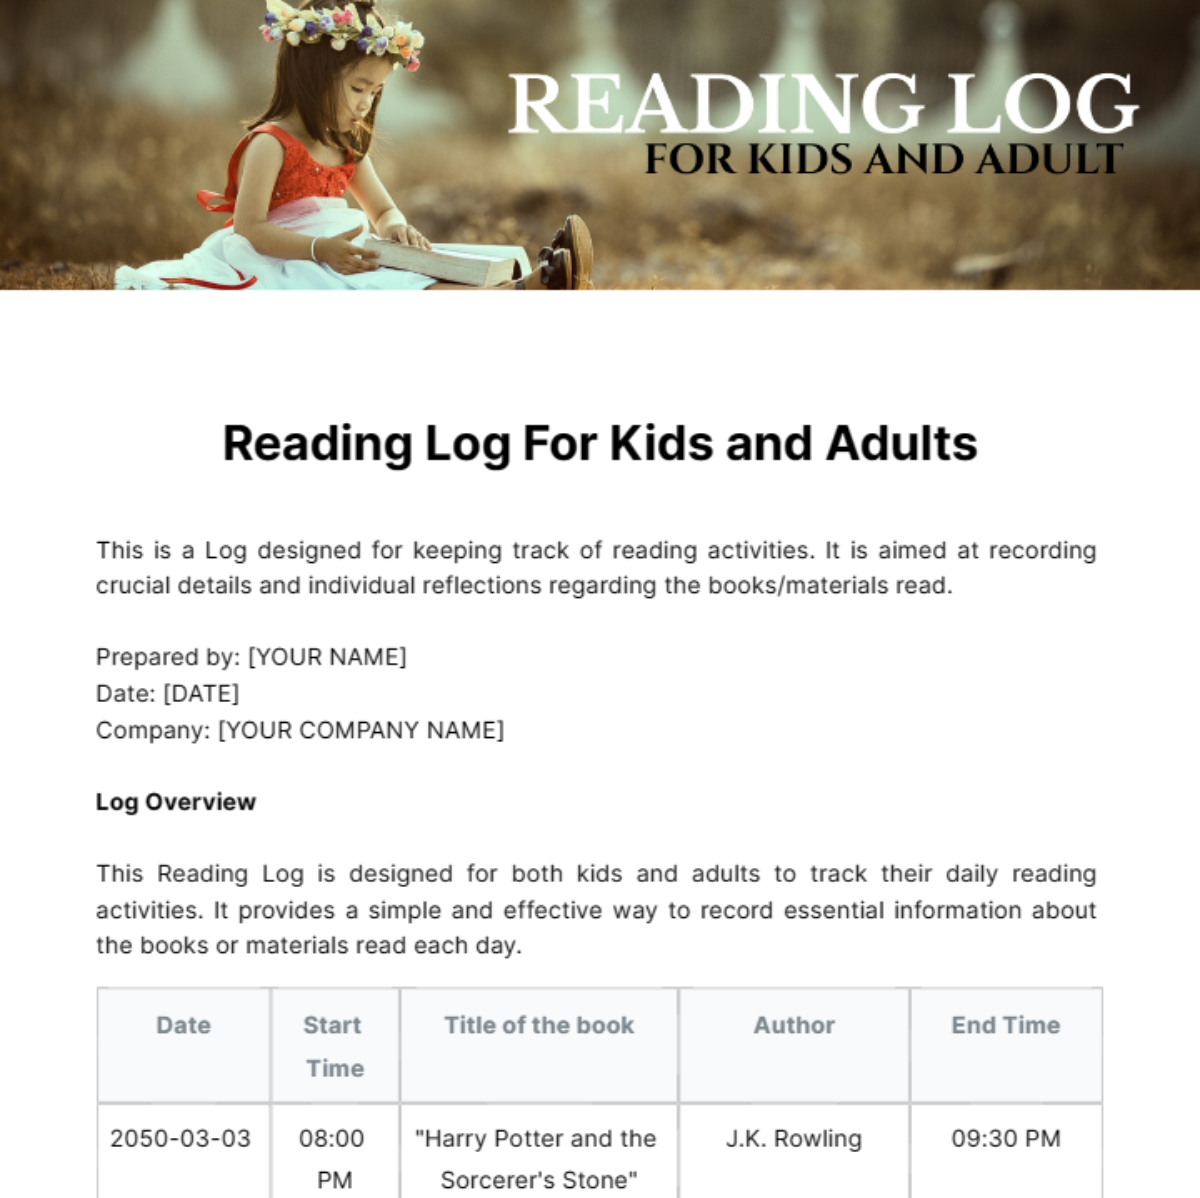 Reading Log For Kids and Adults Template